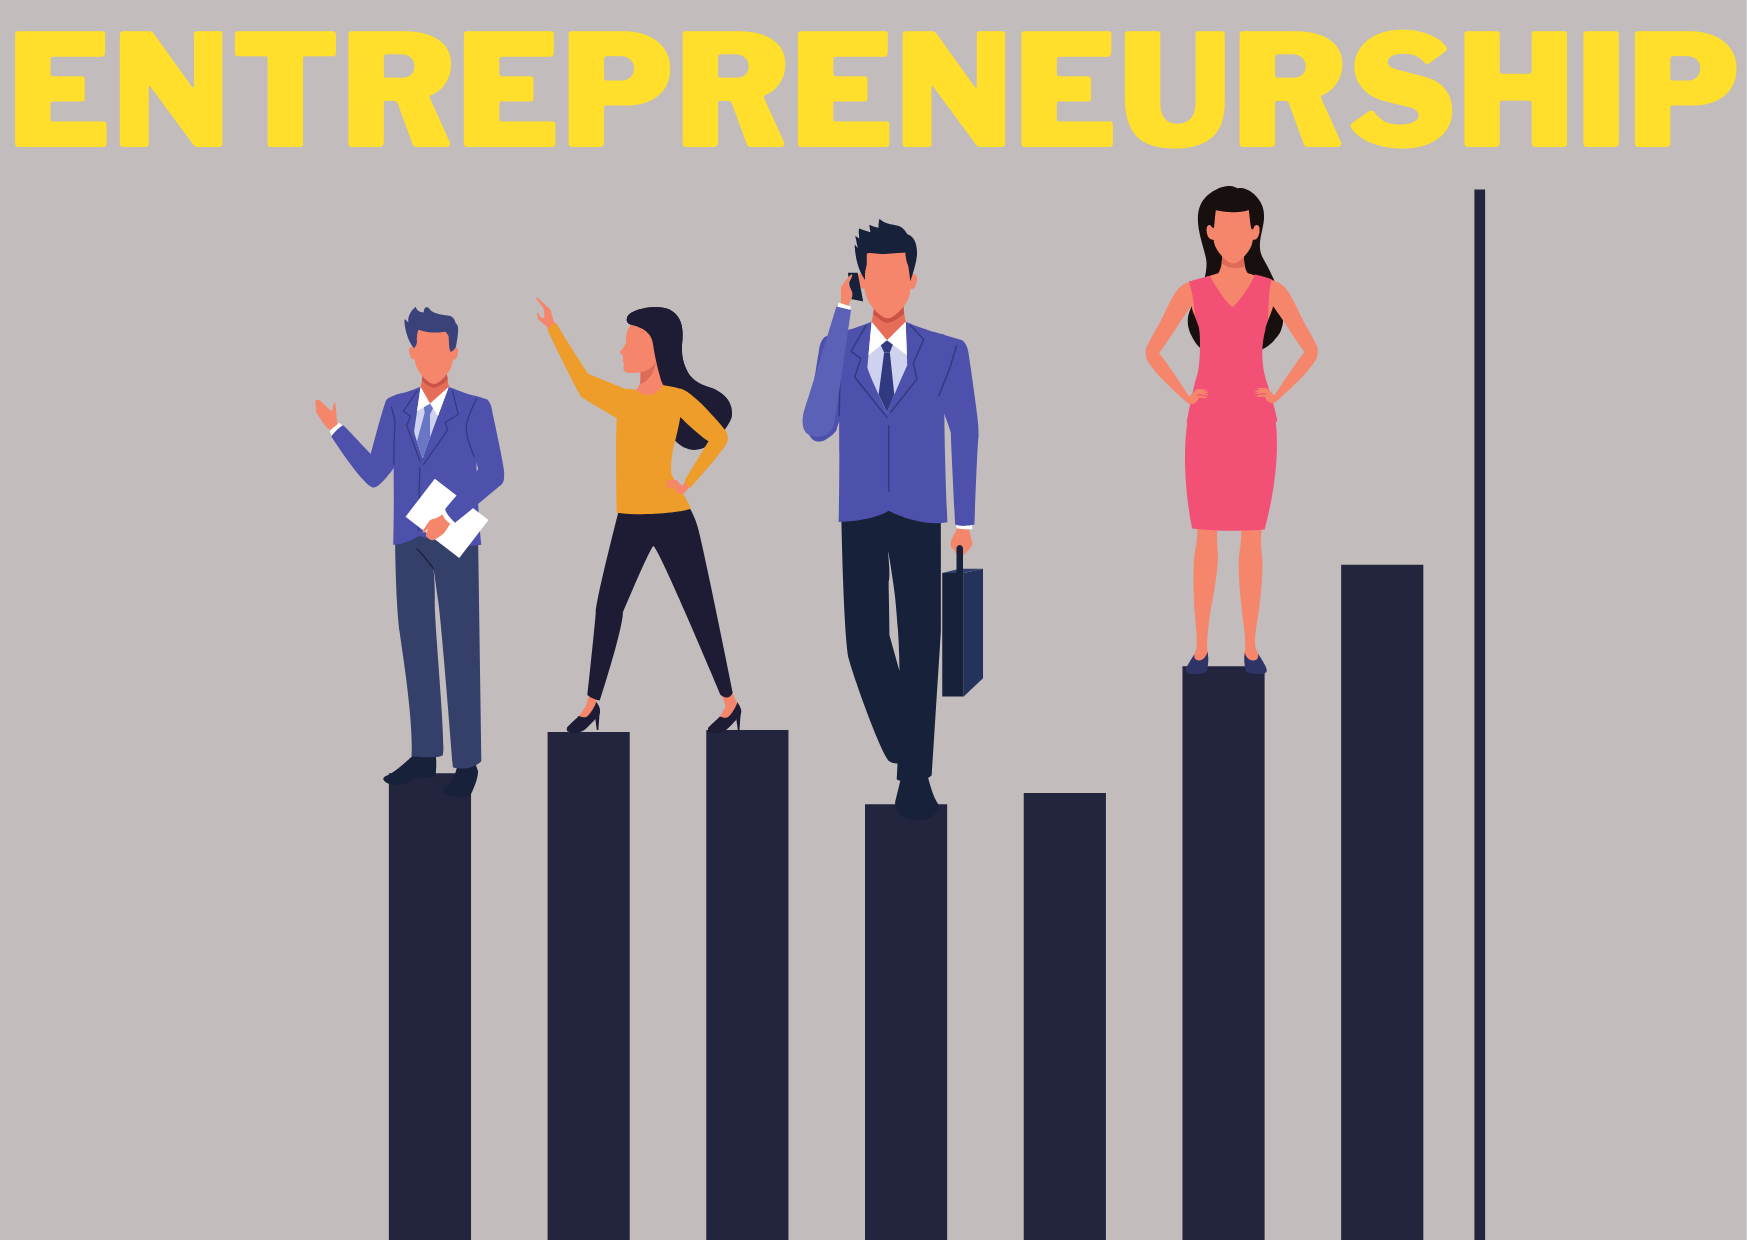 What are the types of Entrepreneurs? - Four main types